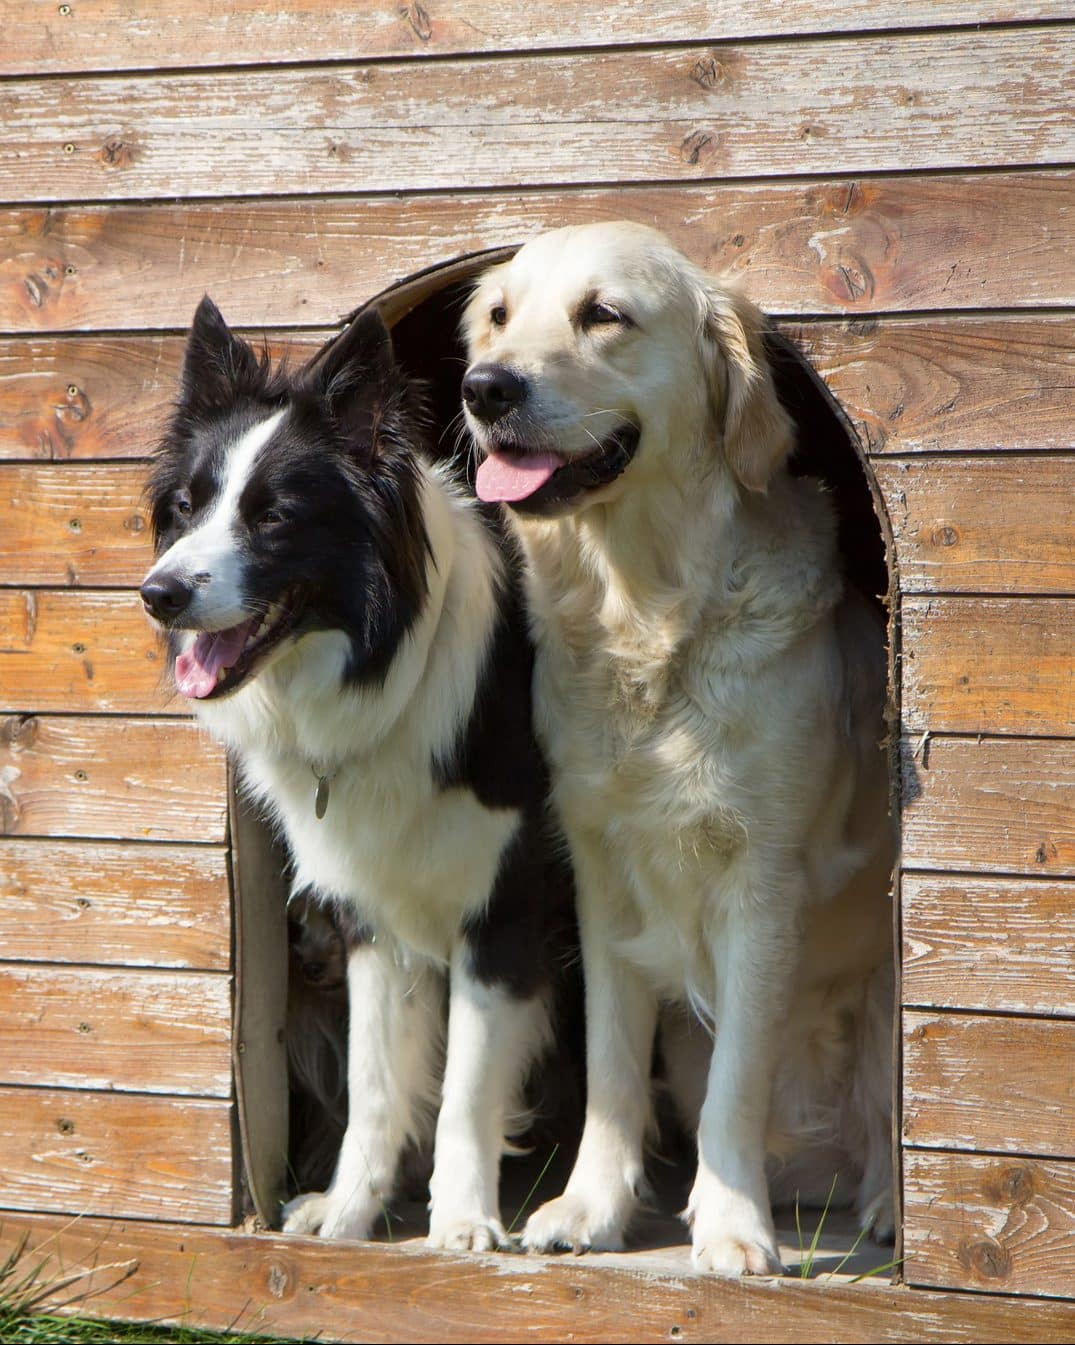 Old dogs standing in dog house.